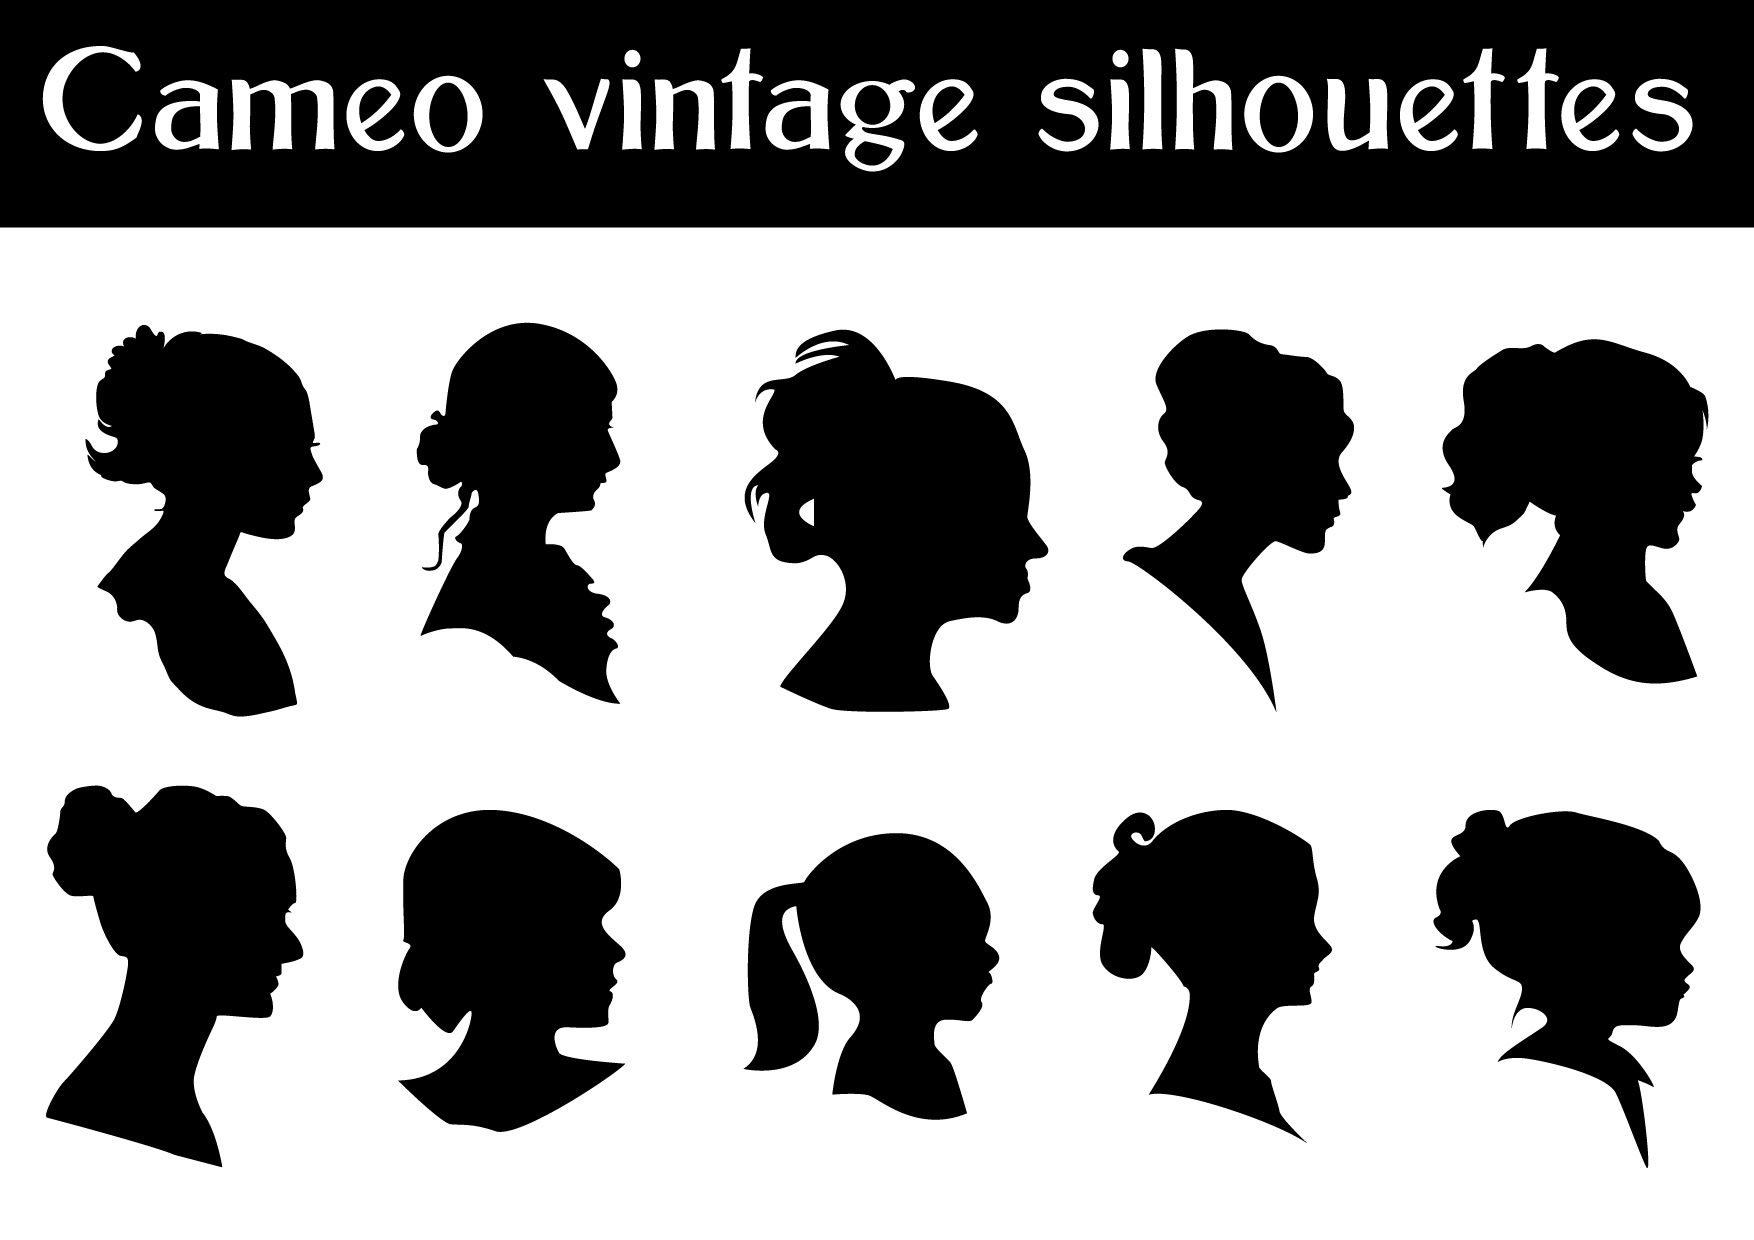 Free Vector Silhouettes Cameo